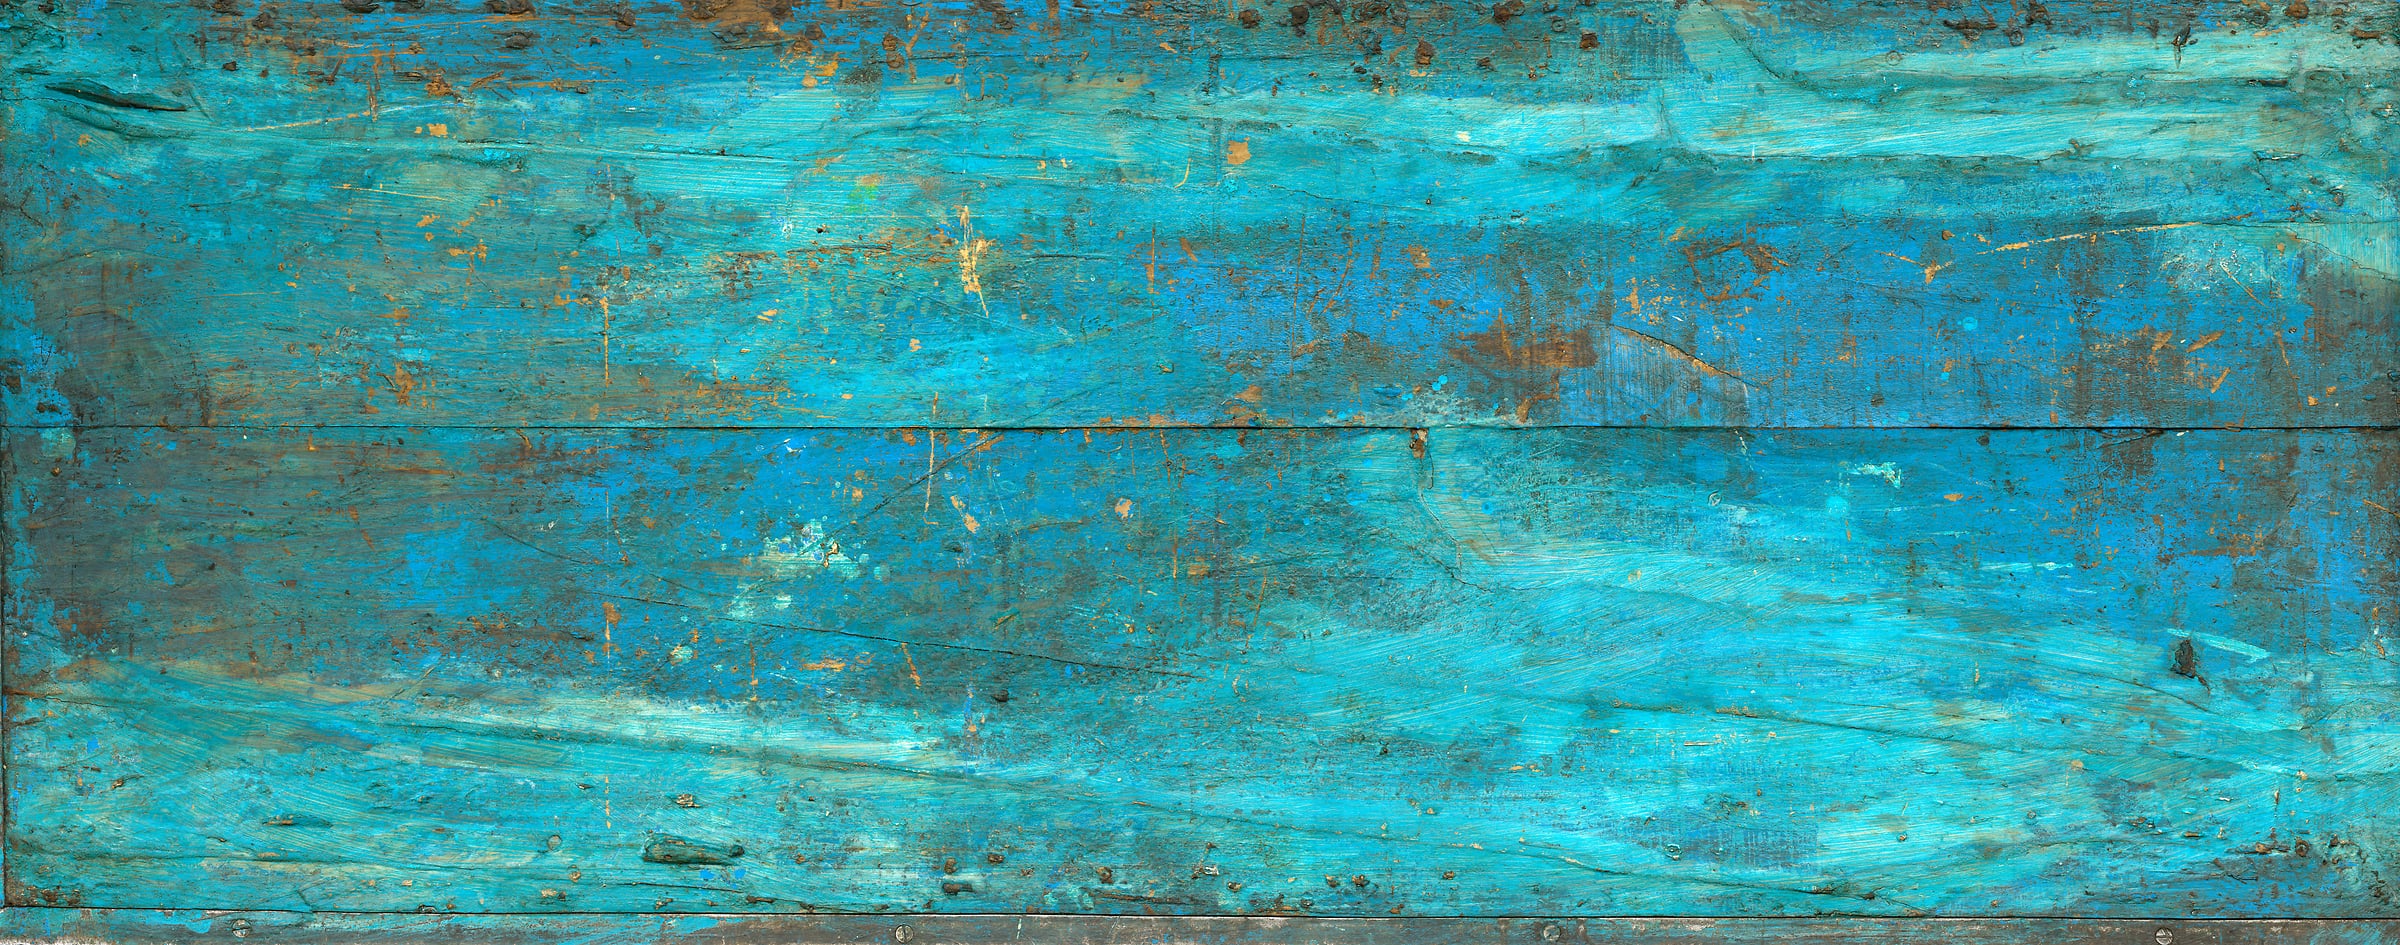 4,227 megapixels! An ultra-high-resolution texture photo file of blue and green distressed painted wood; gigapixel photograph created by David Lineton.